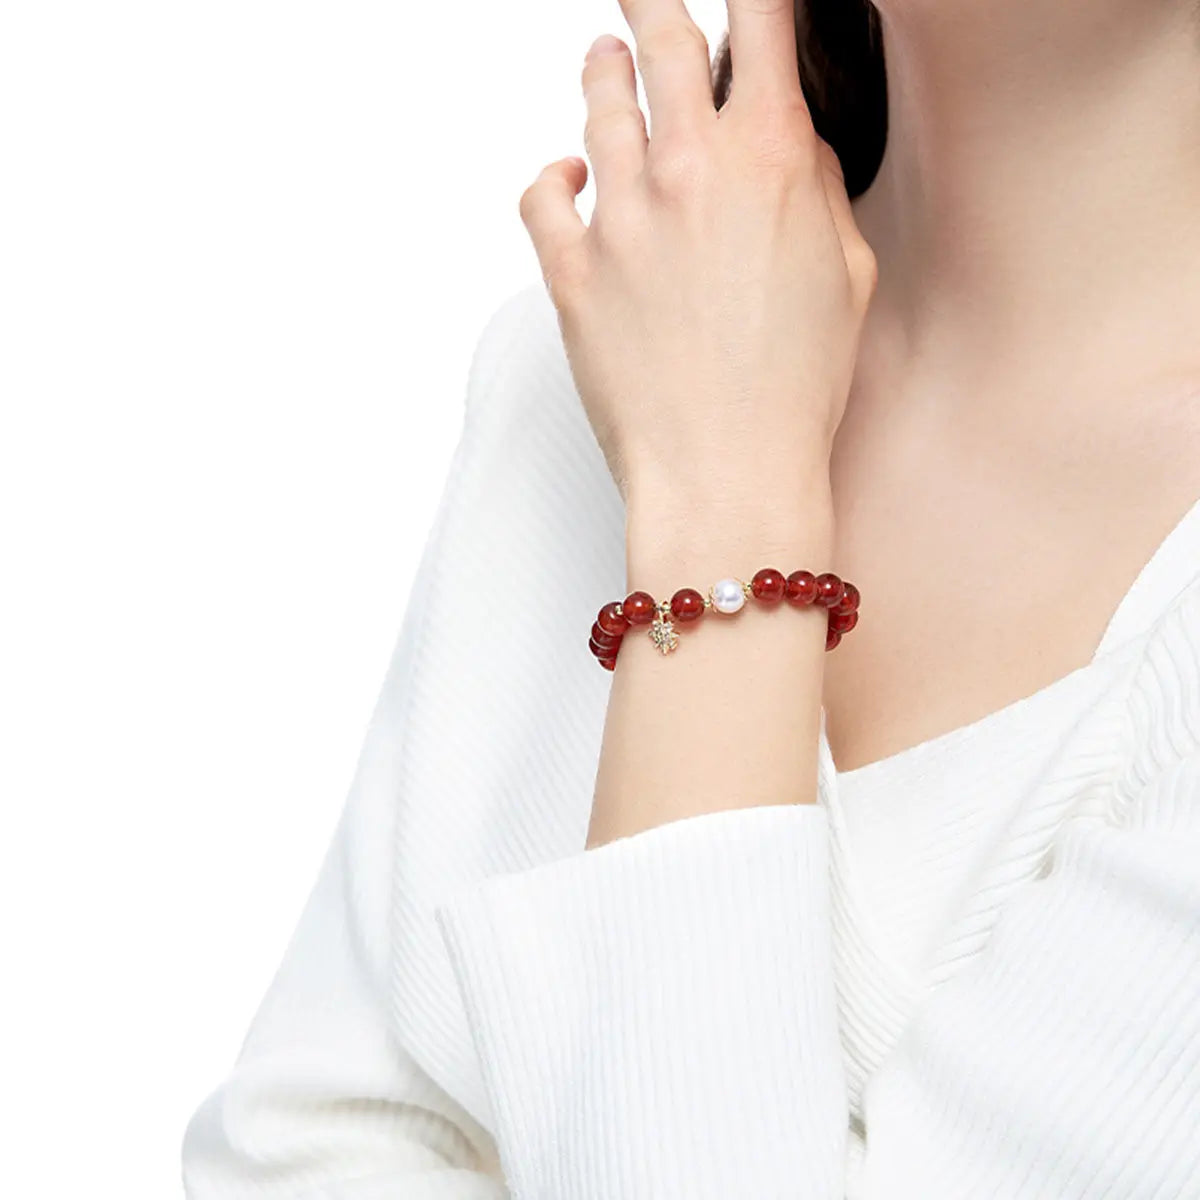 Red Agate Crystal Bracelet with Eight-point Star Charm Healing Crystal Home